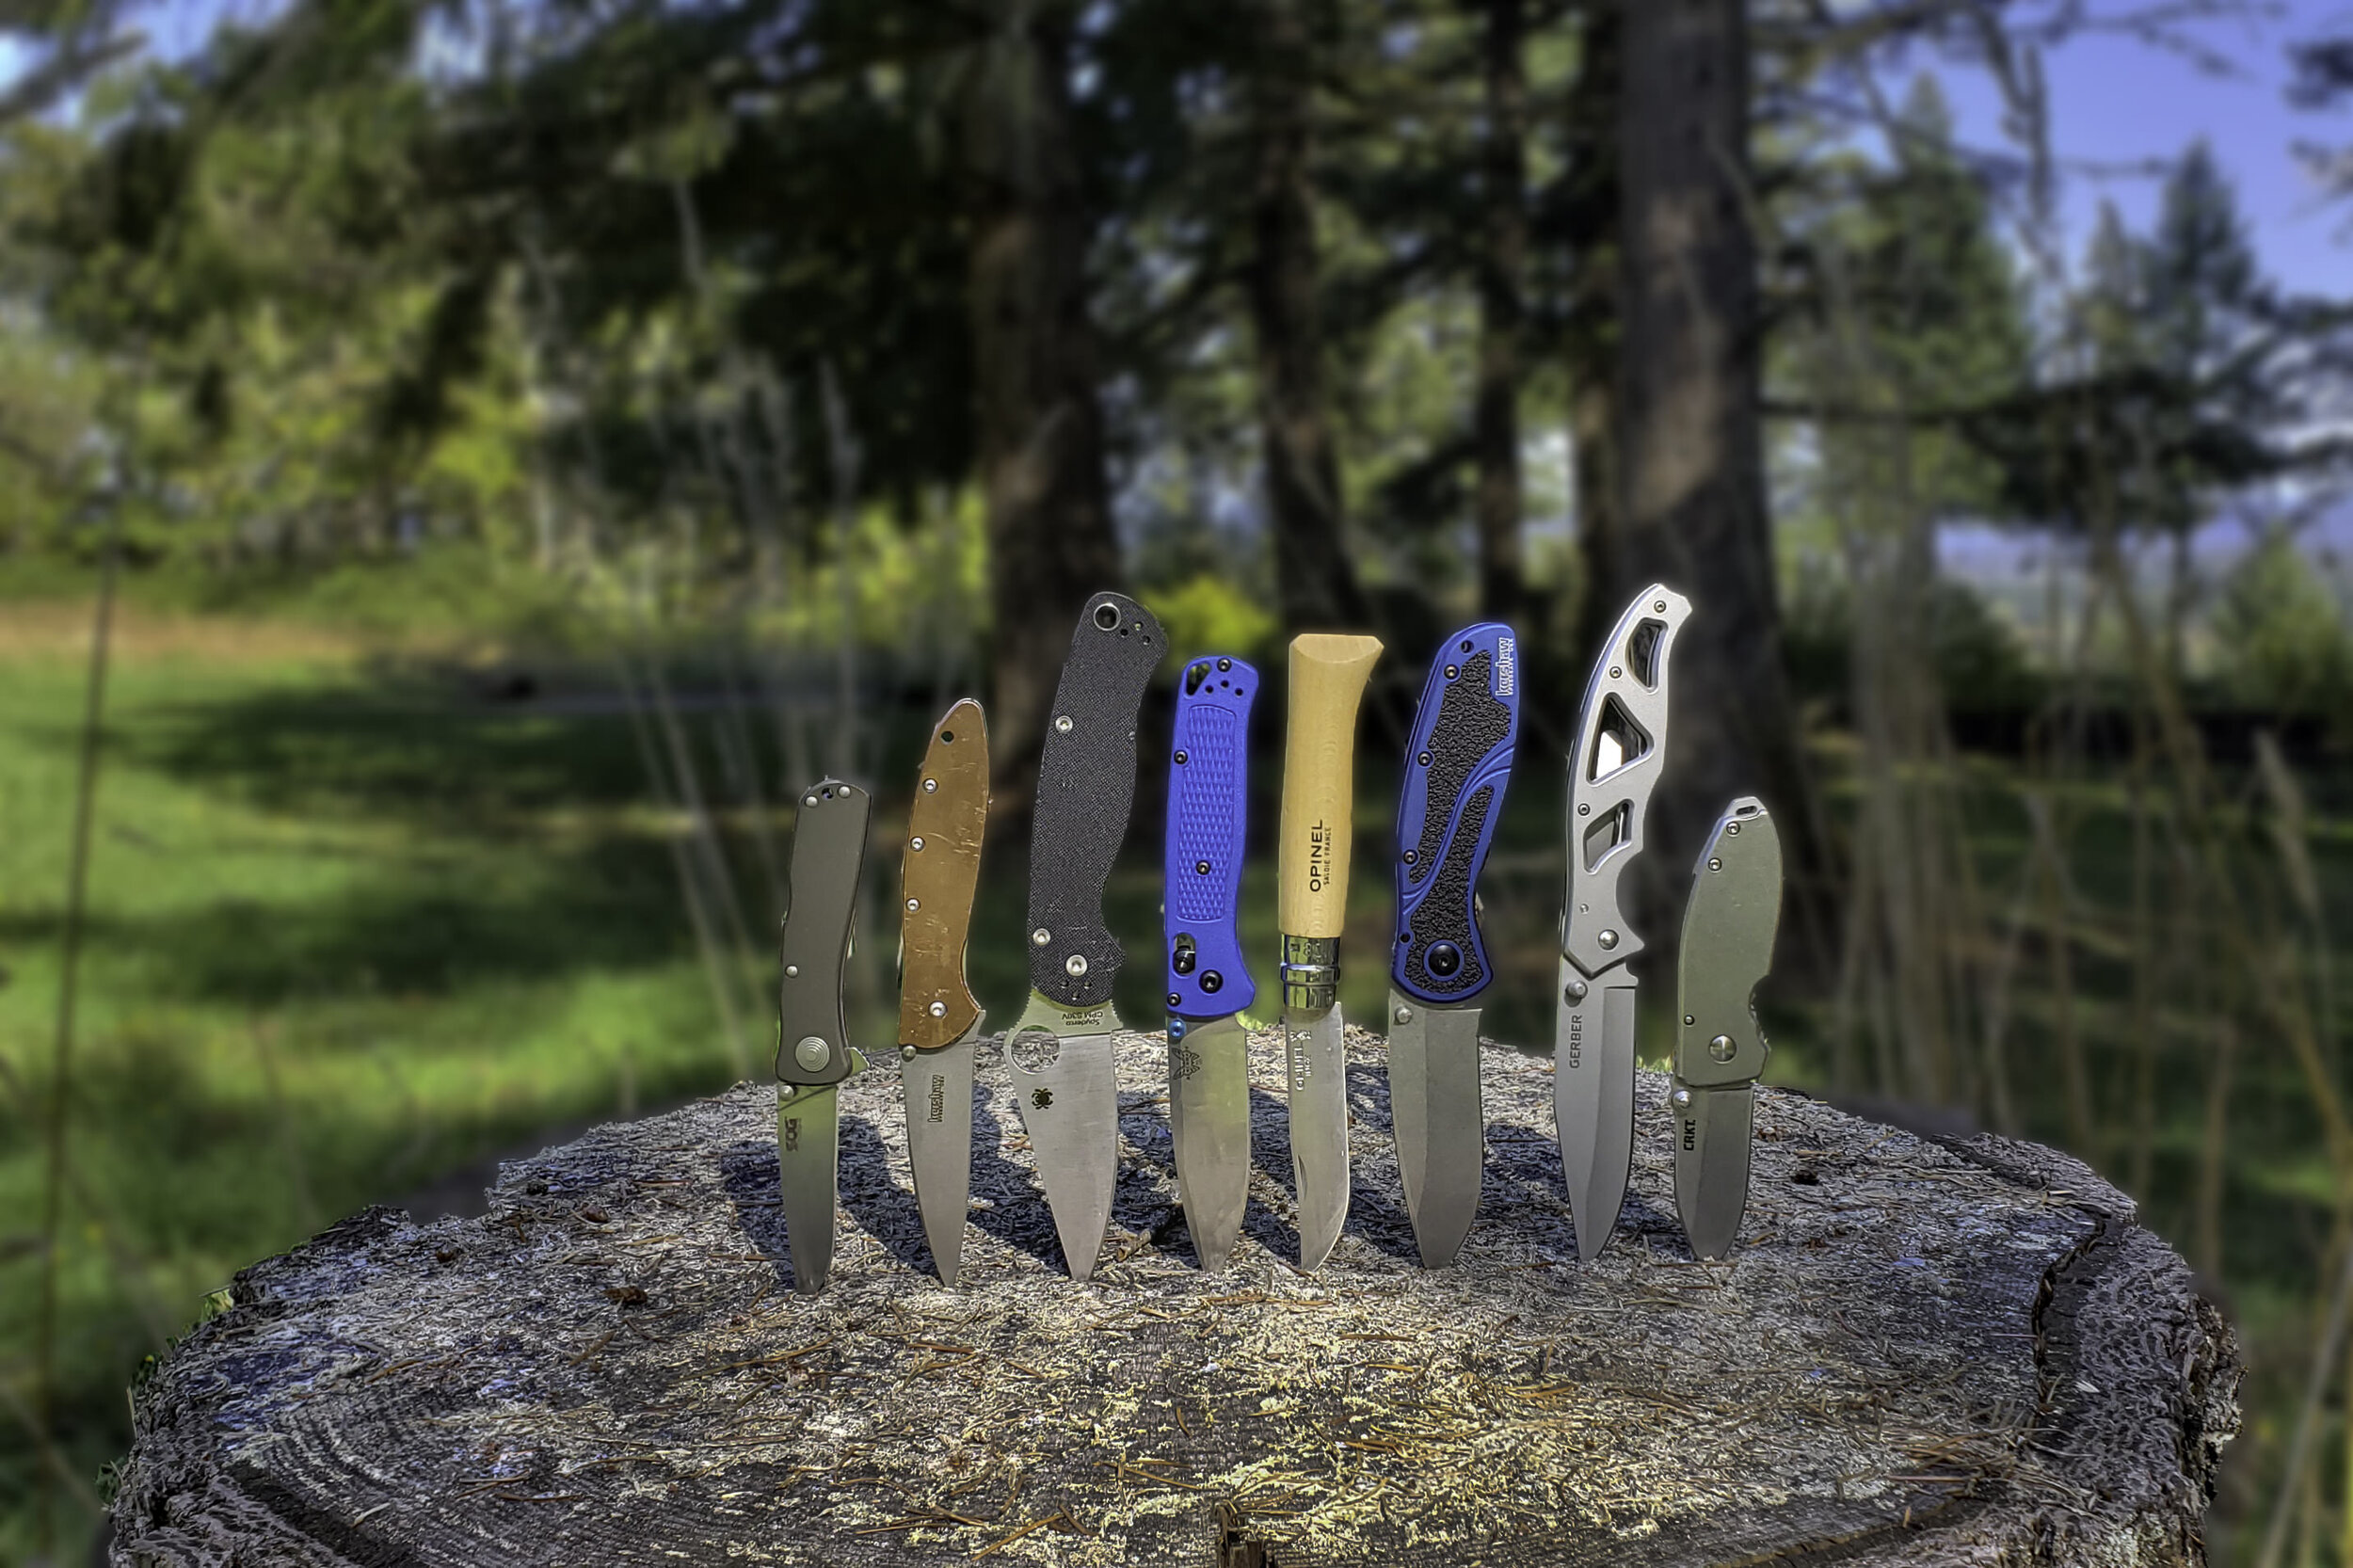 Comparing the blade shape of the best pocket knives on the market